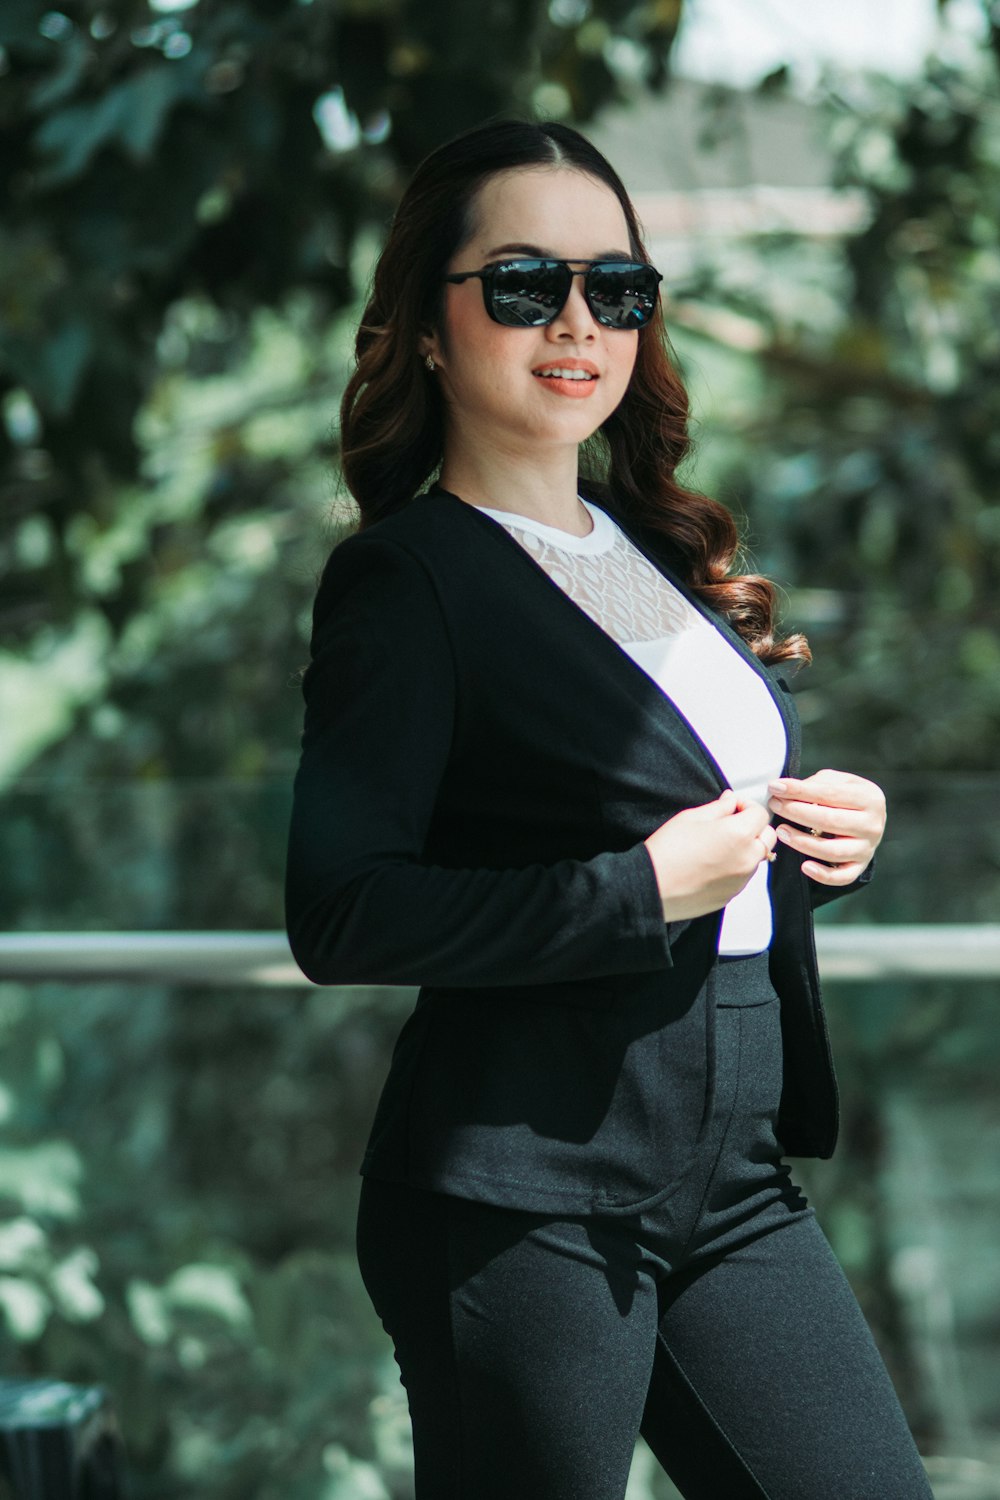 a woman in a black suit and sunglasses